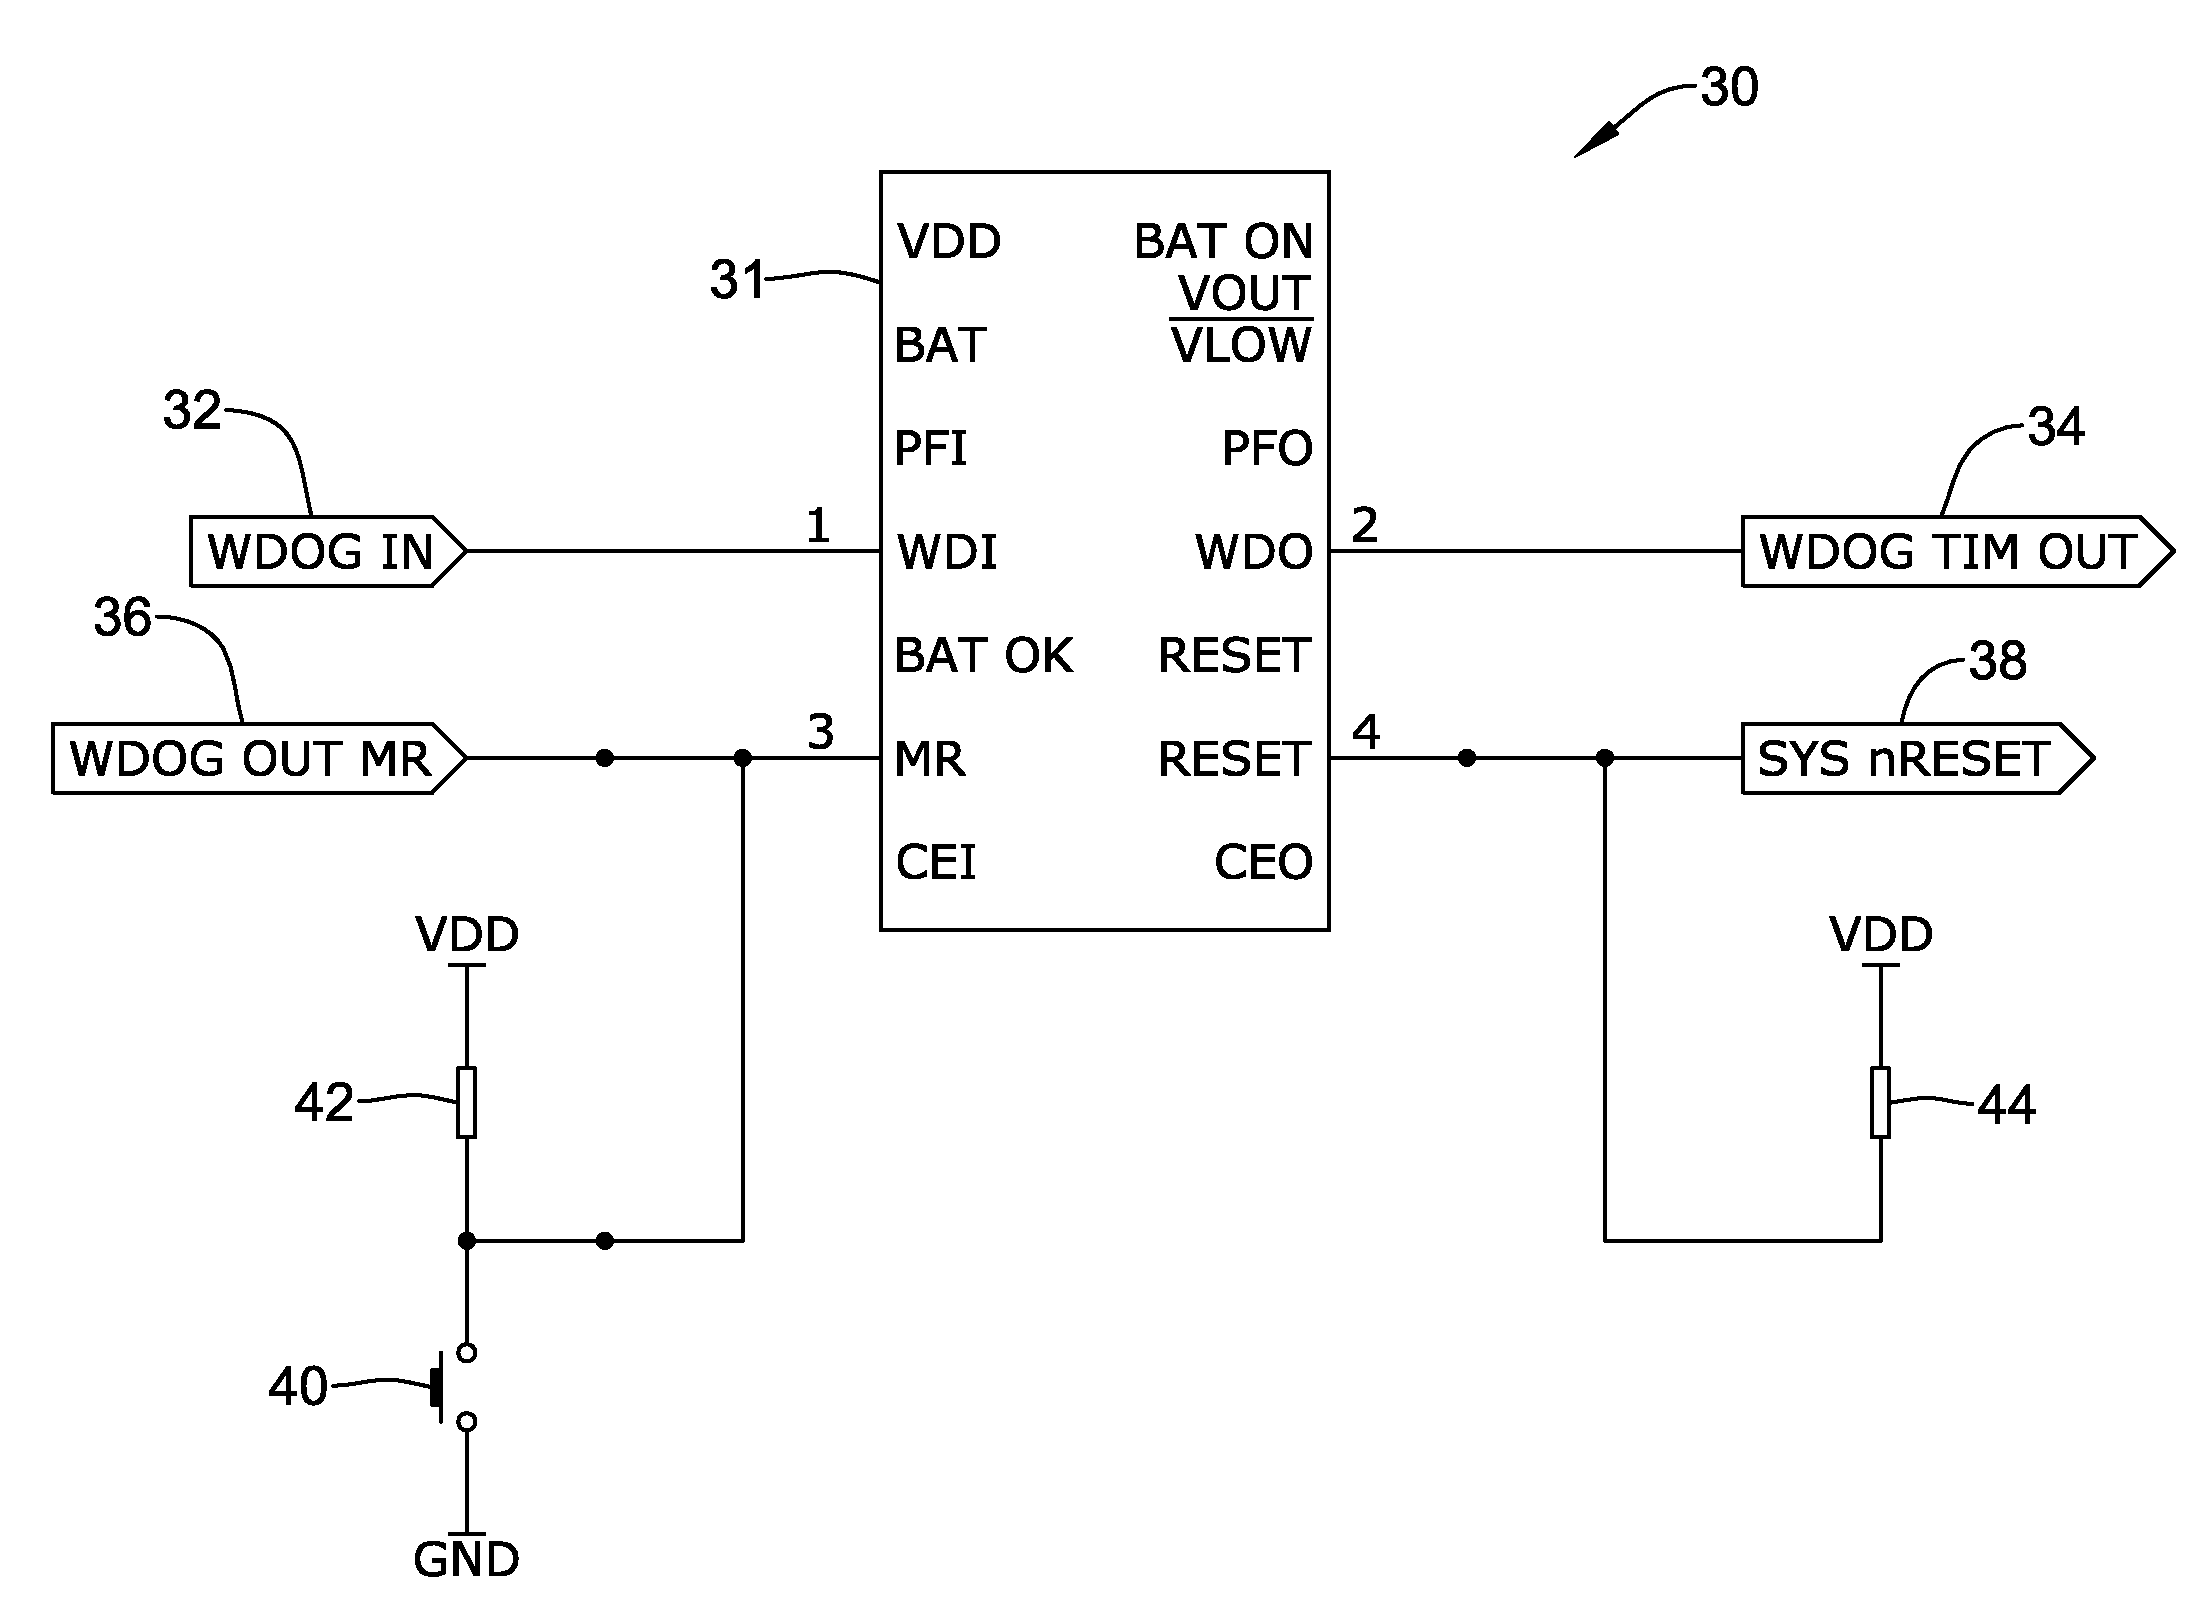 Microprocessor supervision in a special purpose computer system